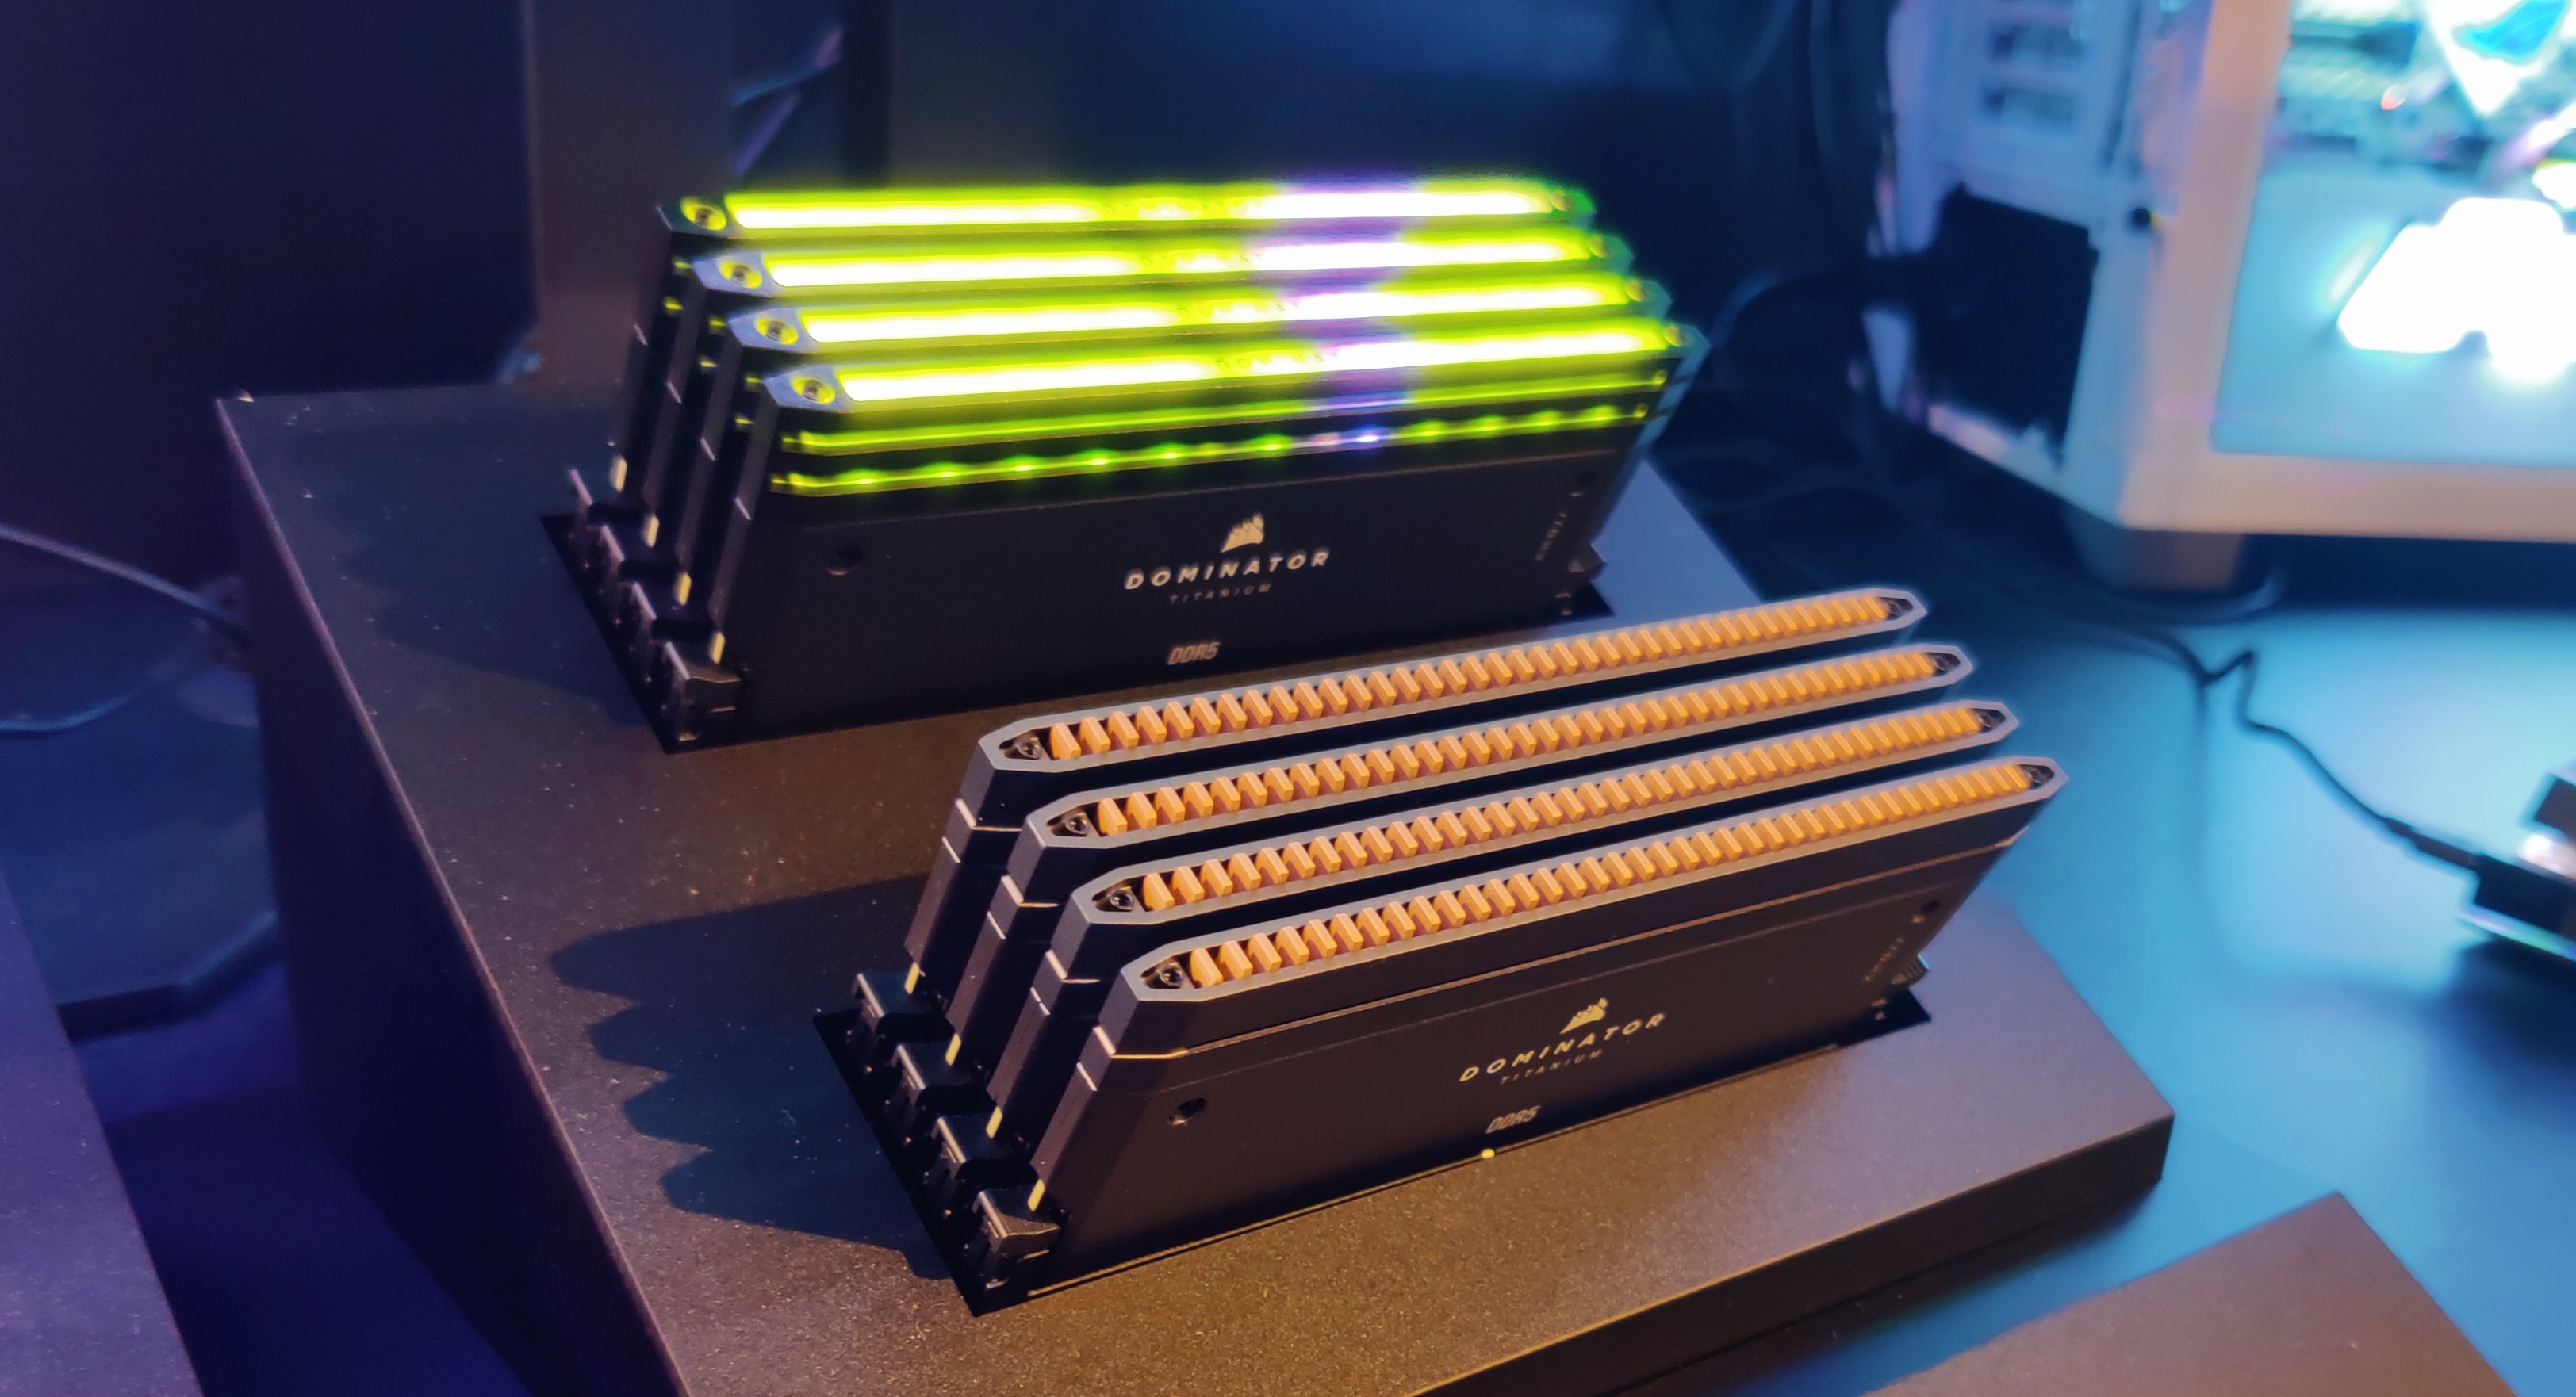  3D print your own DDR5 (kinda) with Corsair's new Dominator kit 